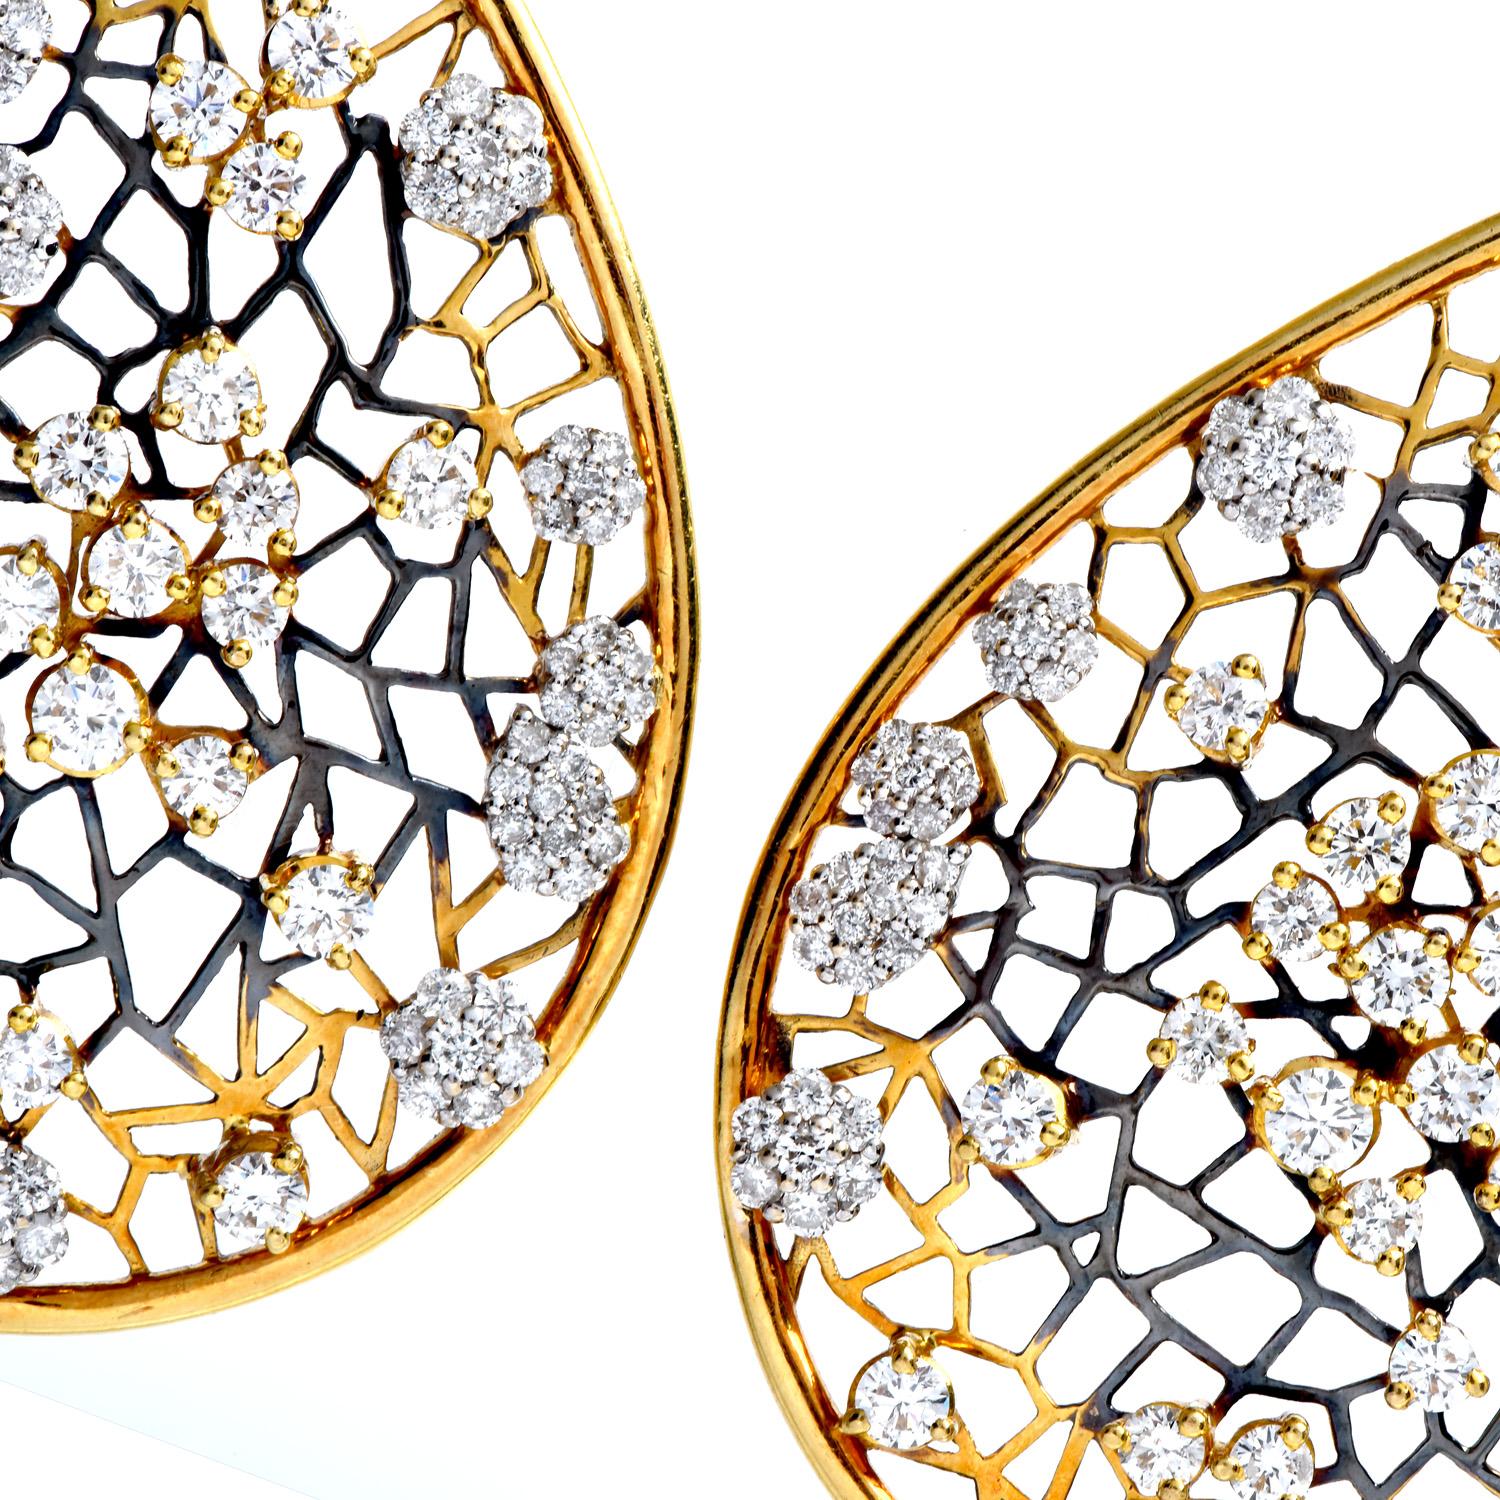 Spectacular royalty-inspired dangle drop earrings, with a spider web motif inner design & crown top accents.

Crafted in Solid 18K Yellow Gold, Oxicide Accents.

They magically present 456 round-cut center Diamonds weighing approximately